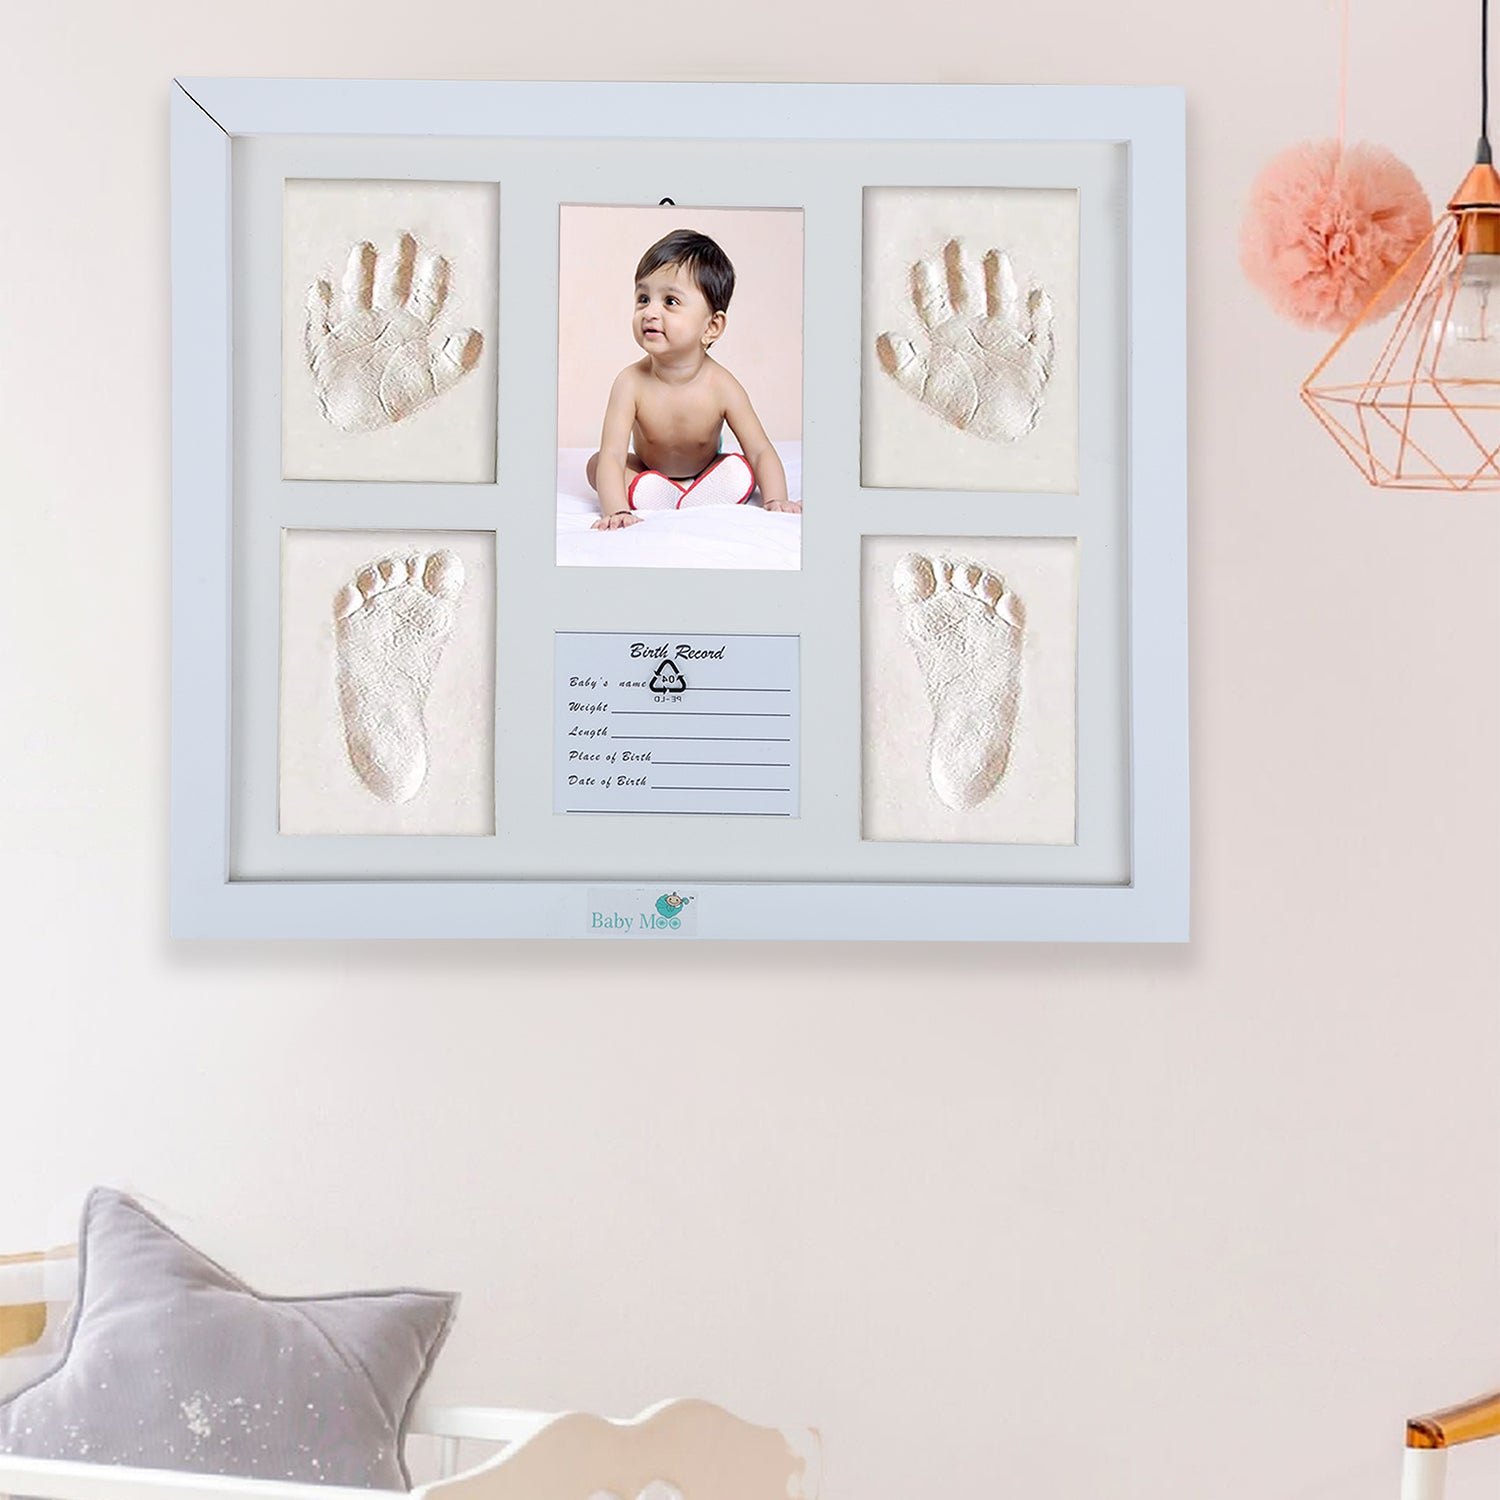 Baby Moo Clay Handprint And Footprint Impression Wooden Photo Frame For Infant Memories - White